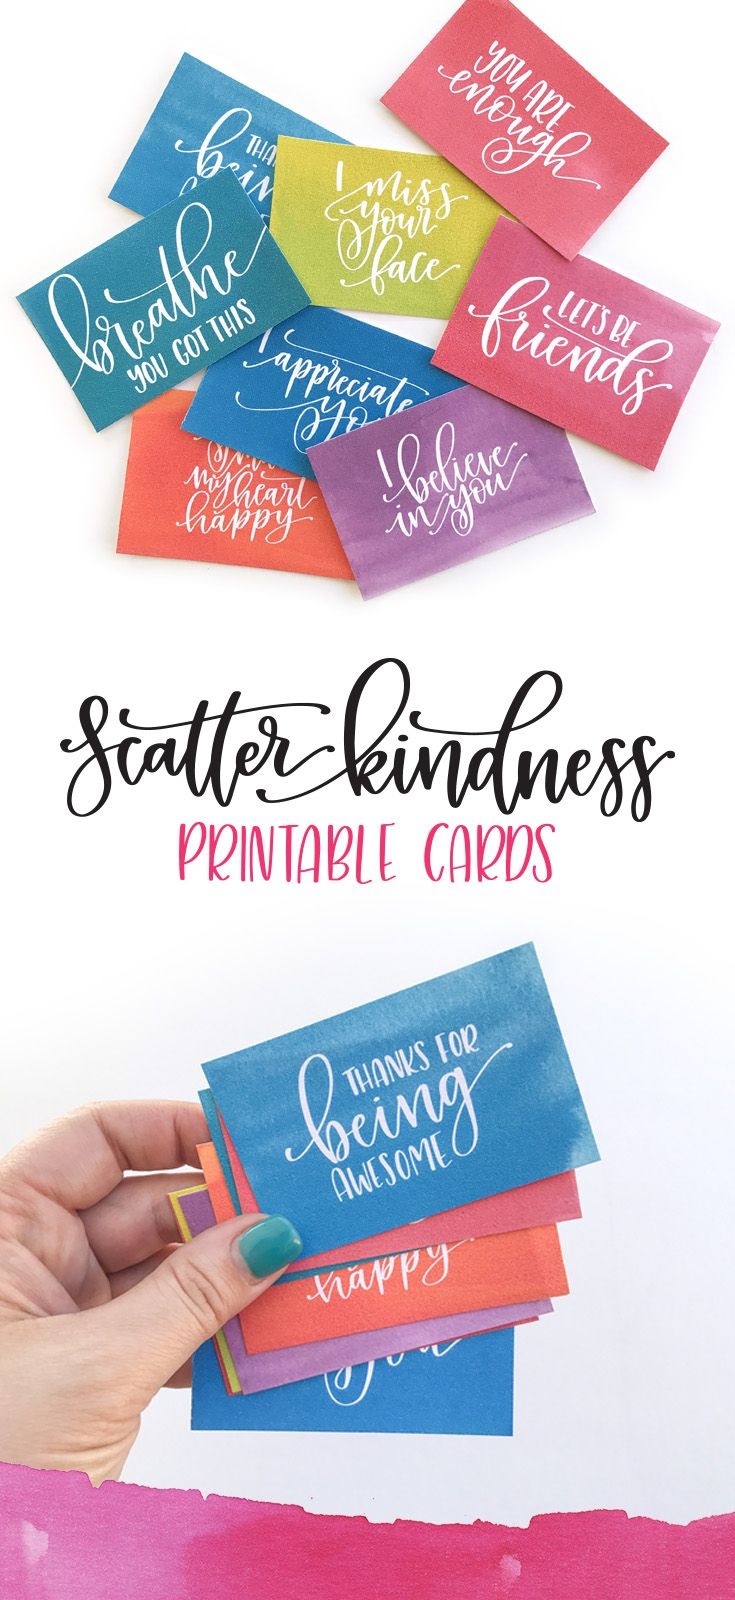 Scatter Kindness : Free Printable | Pretty Printables | Kindness - Free Printable Kindness Cards